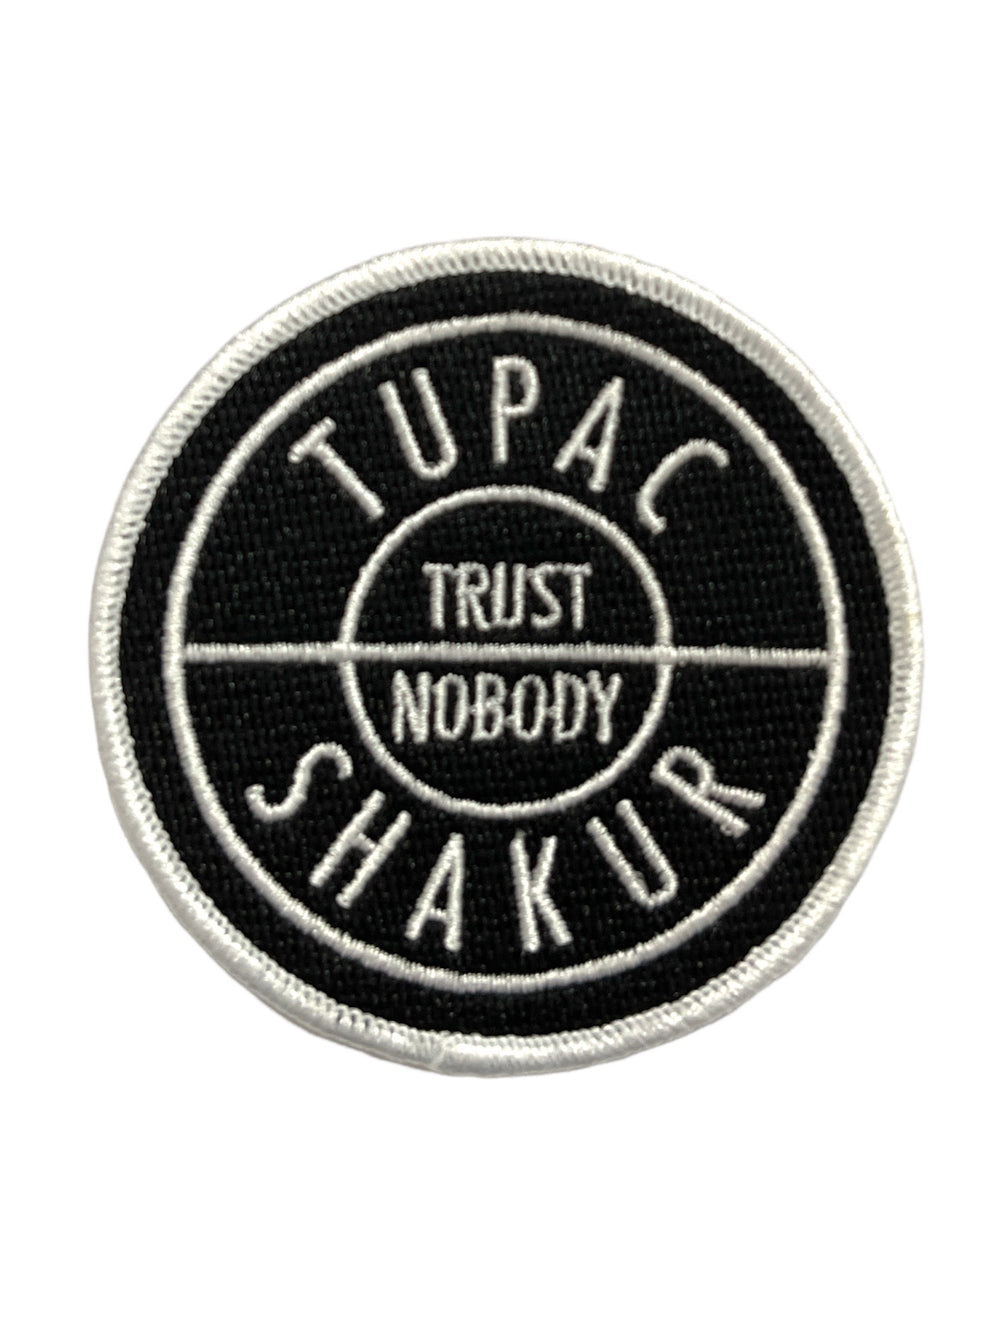 Tupac Shakur Trust Nobody Official Woven Patch Brand New